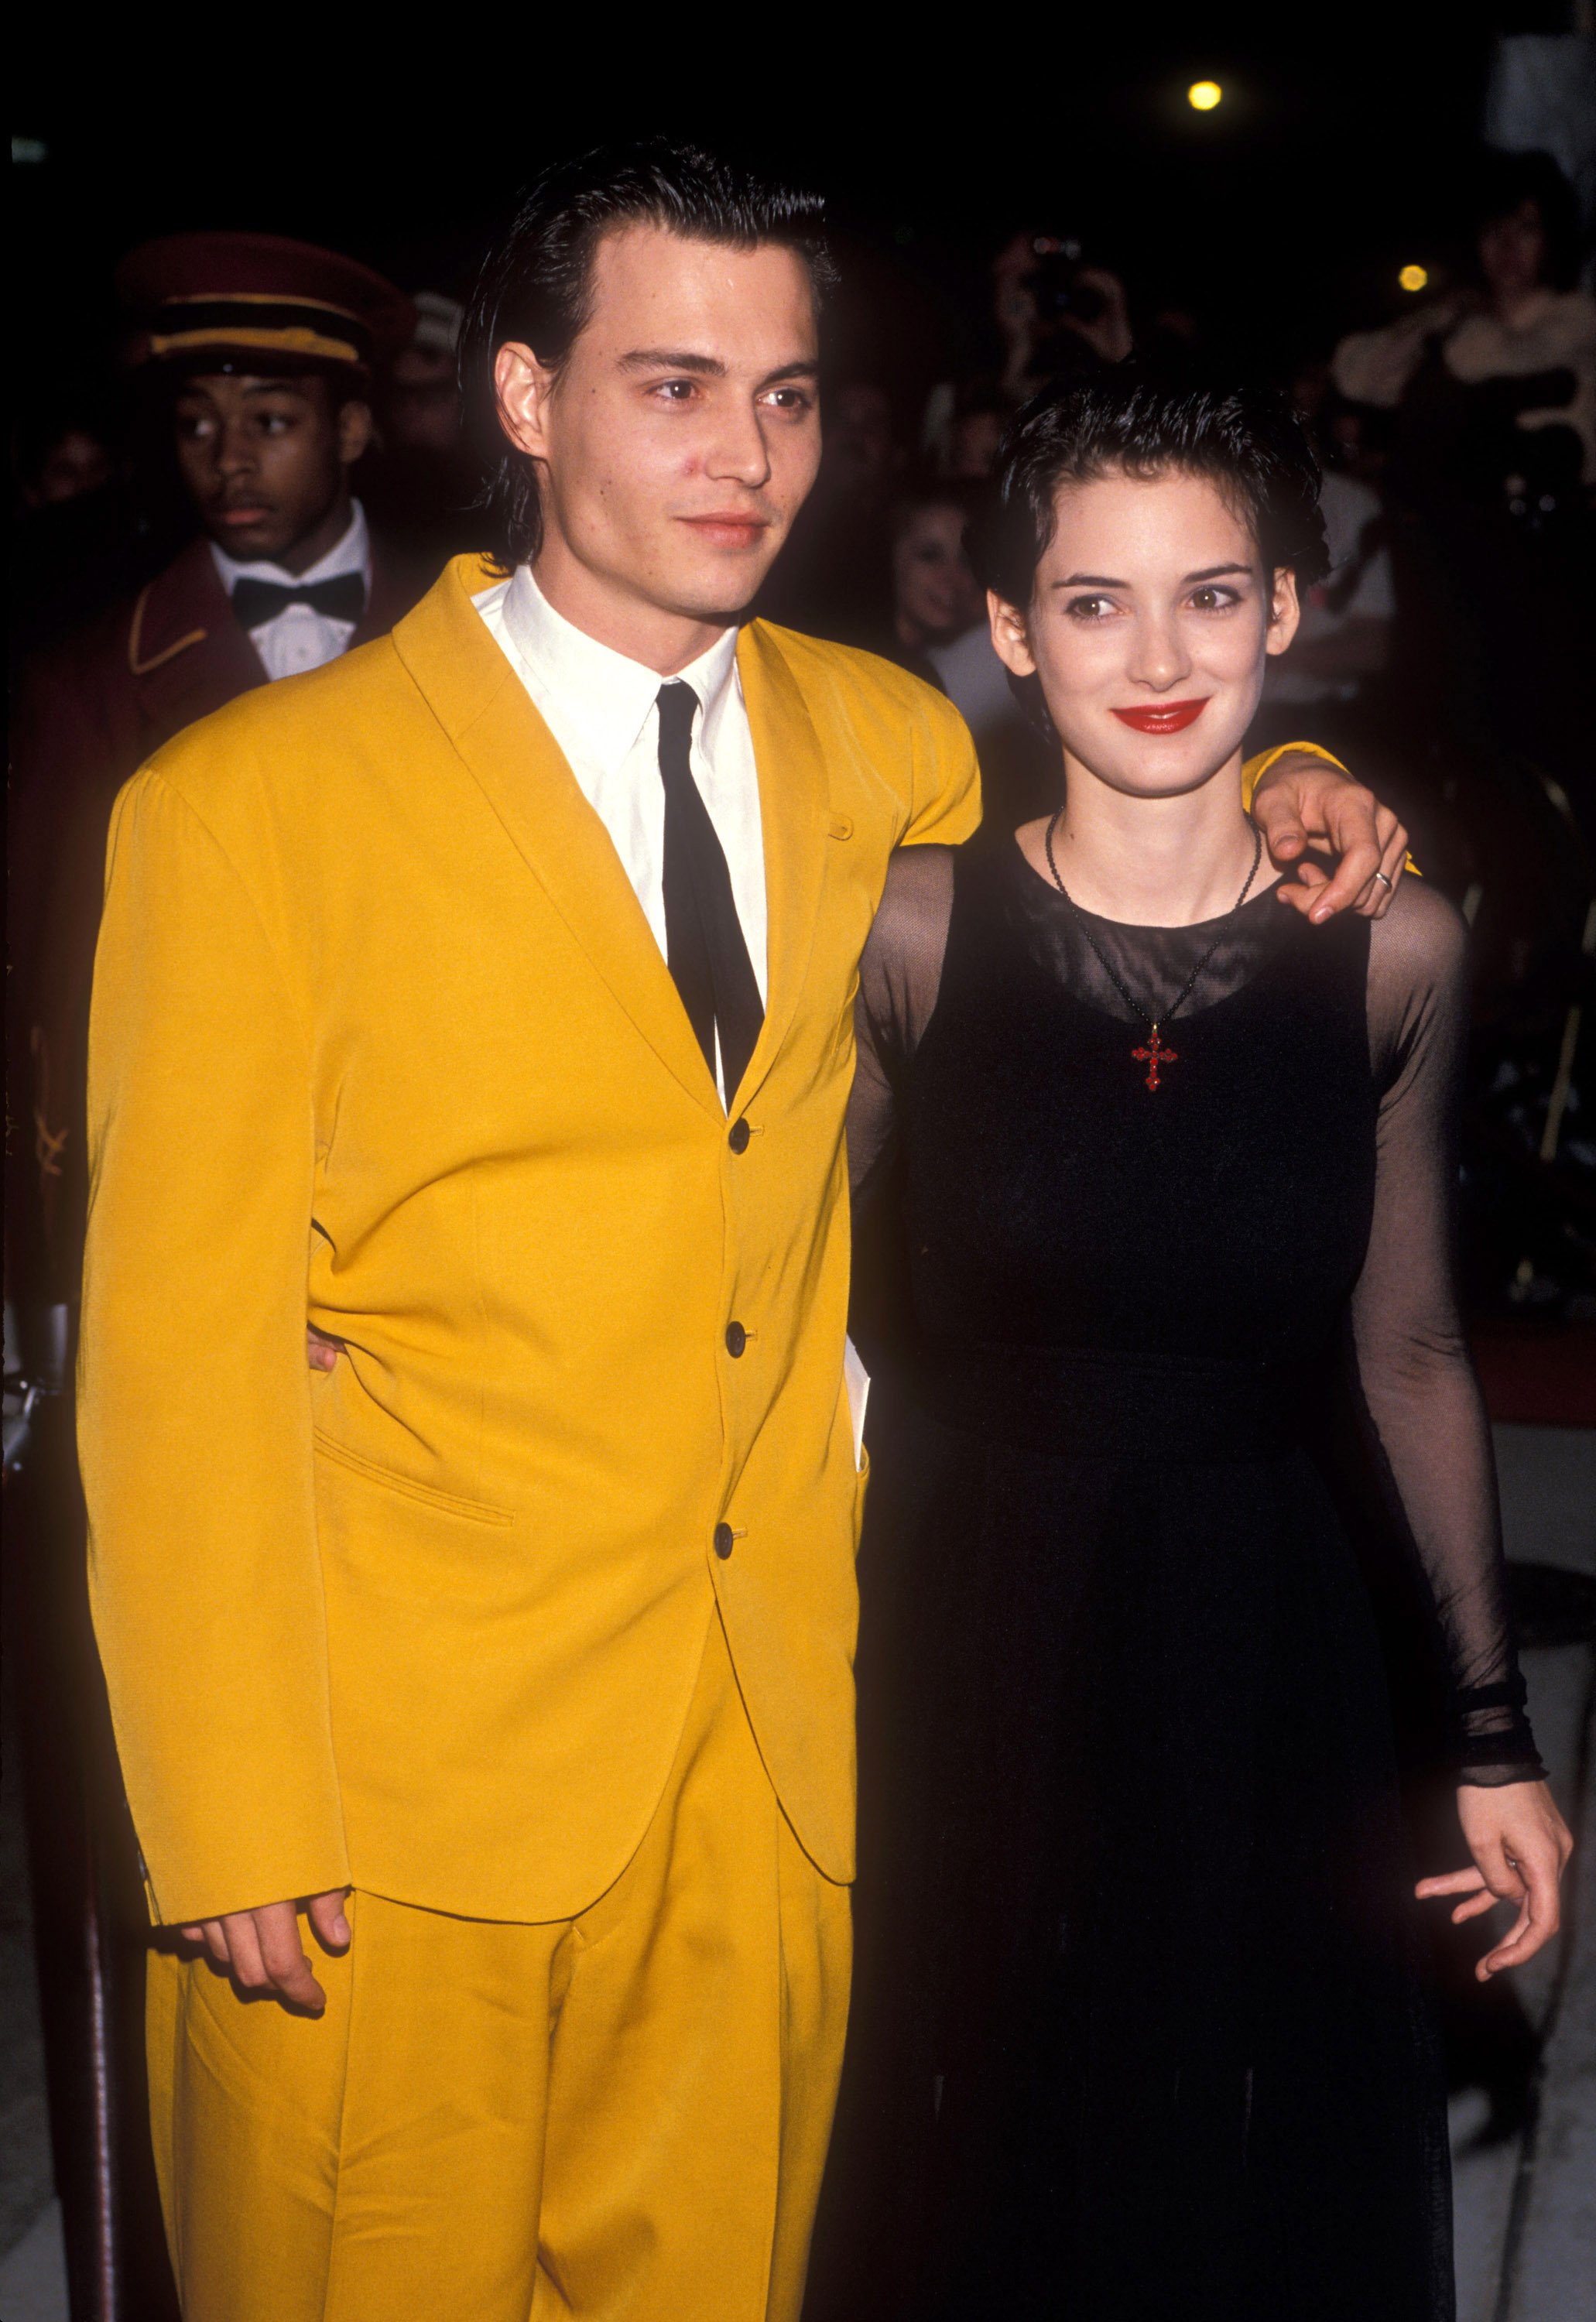 Johnny Depp and Winona Ryder. | Source: Getty Images